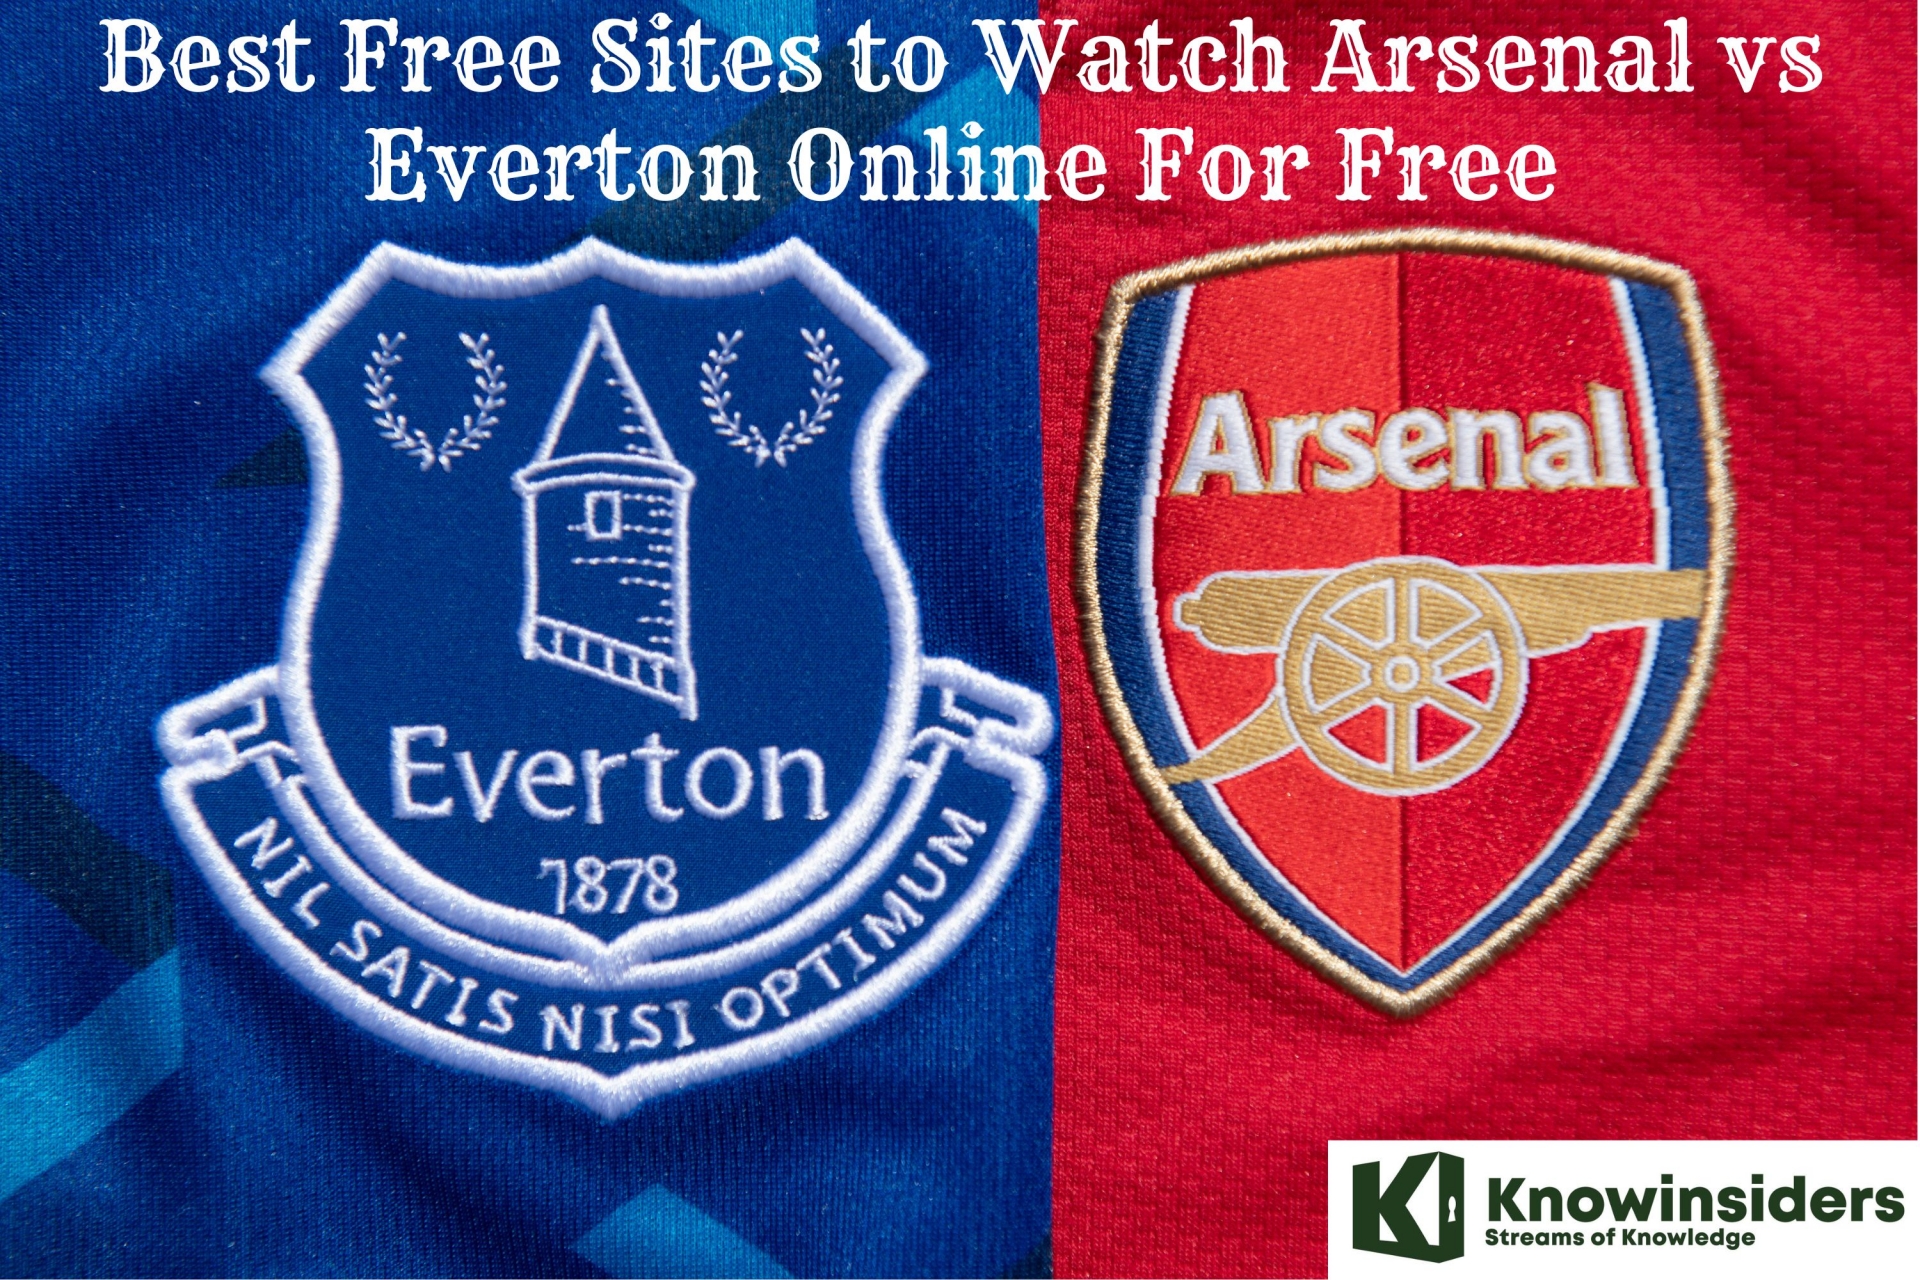 Best Free Sites to Watch Arsenal vs Everton Online For Free